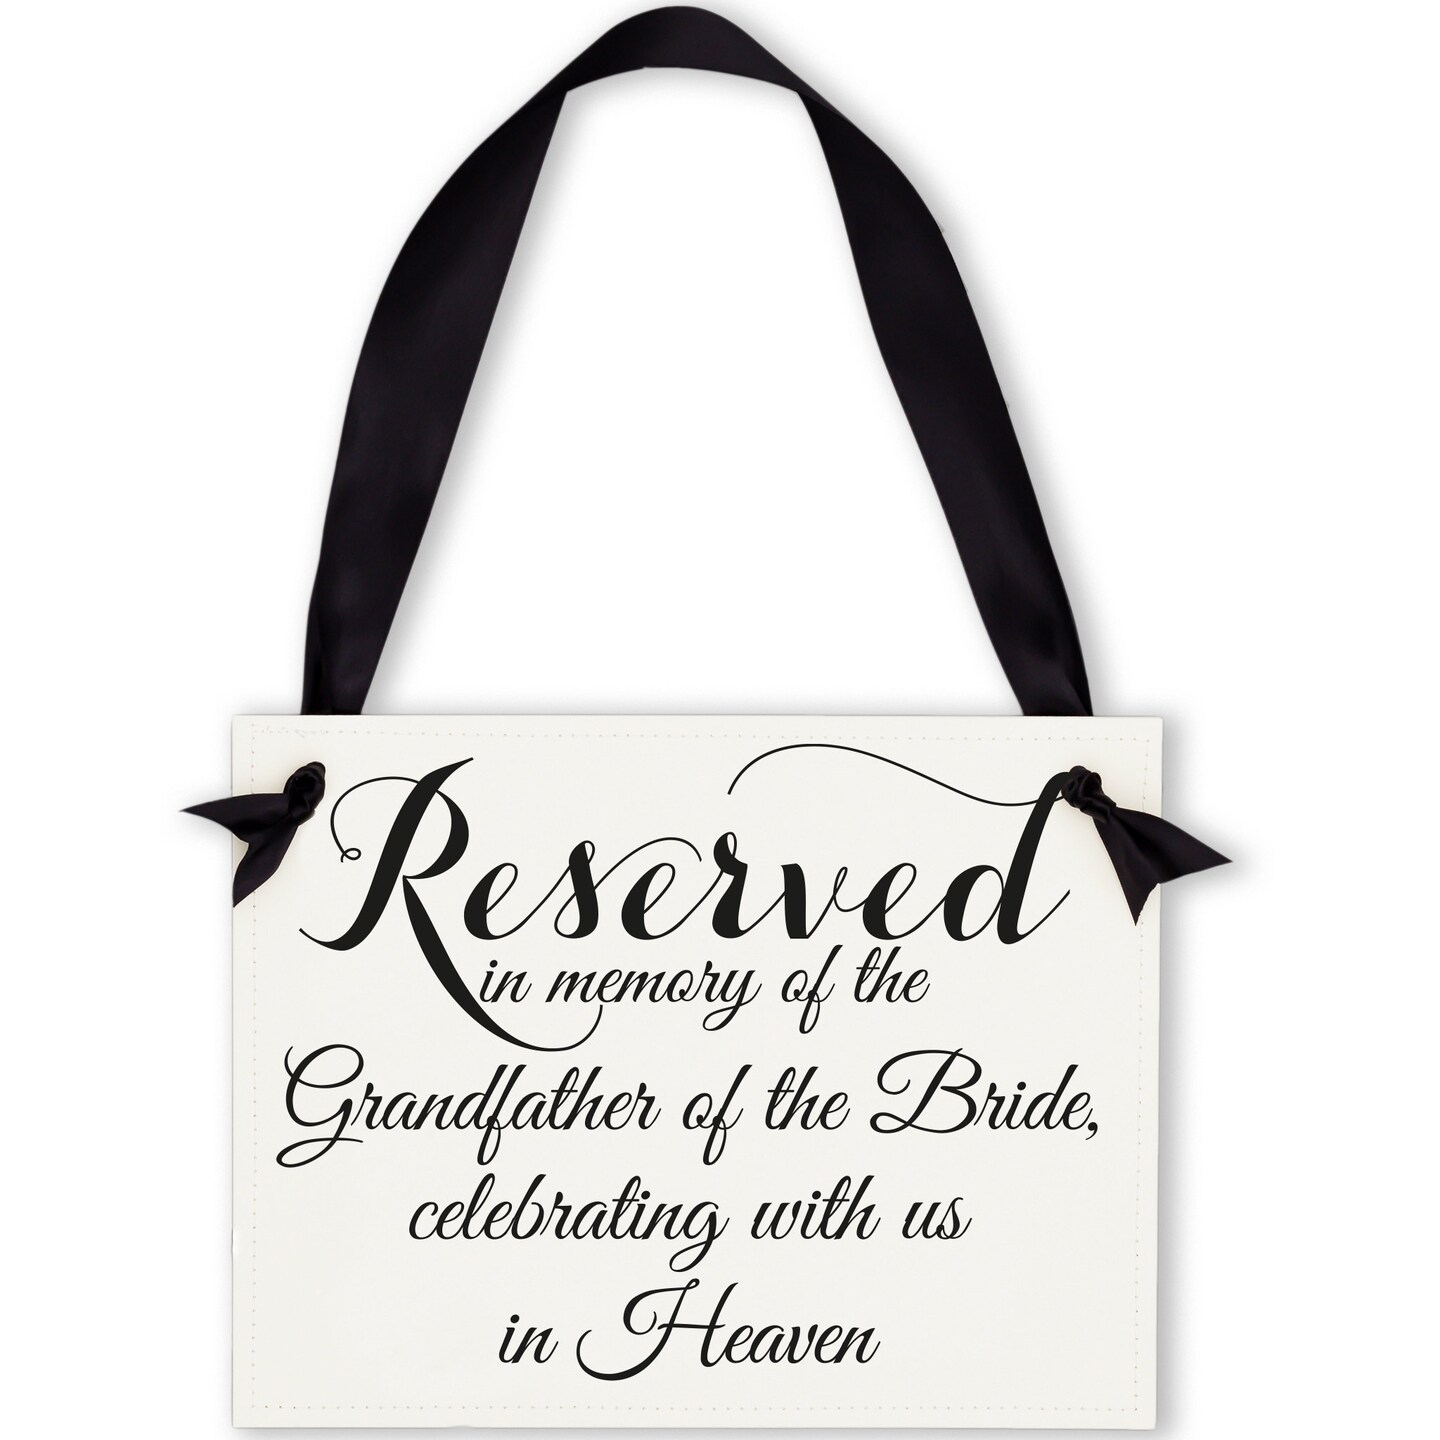 Ritzy Rose Grandfather of the Bride Memorial Sign - Black on 11x8in White Linen Cardstock with Black Ribbon